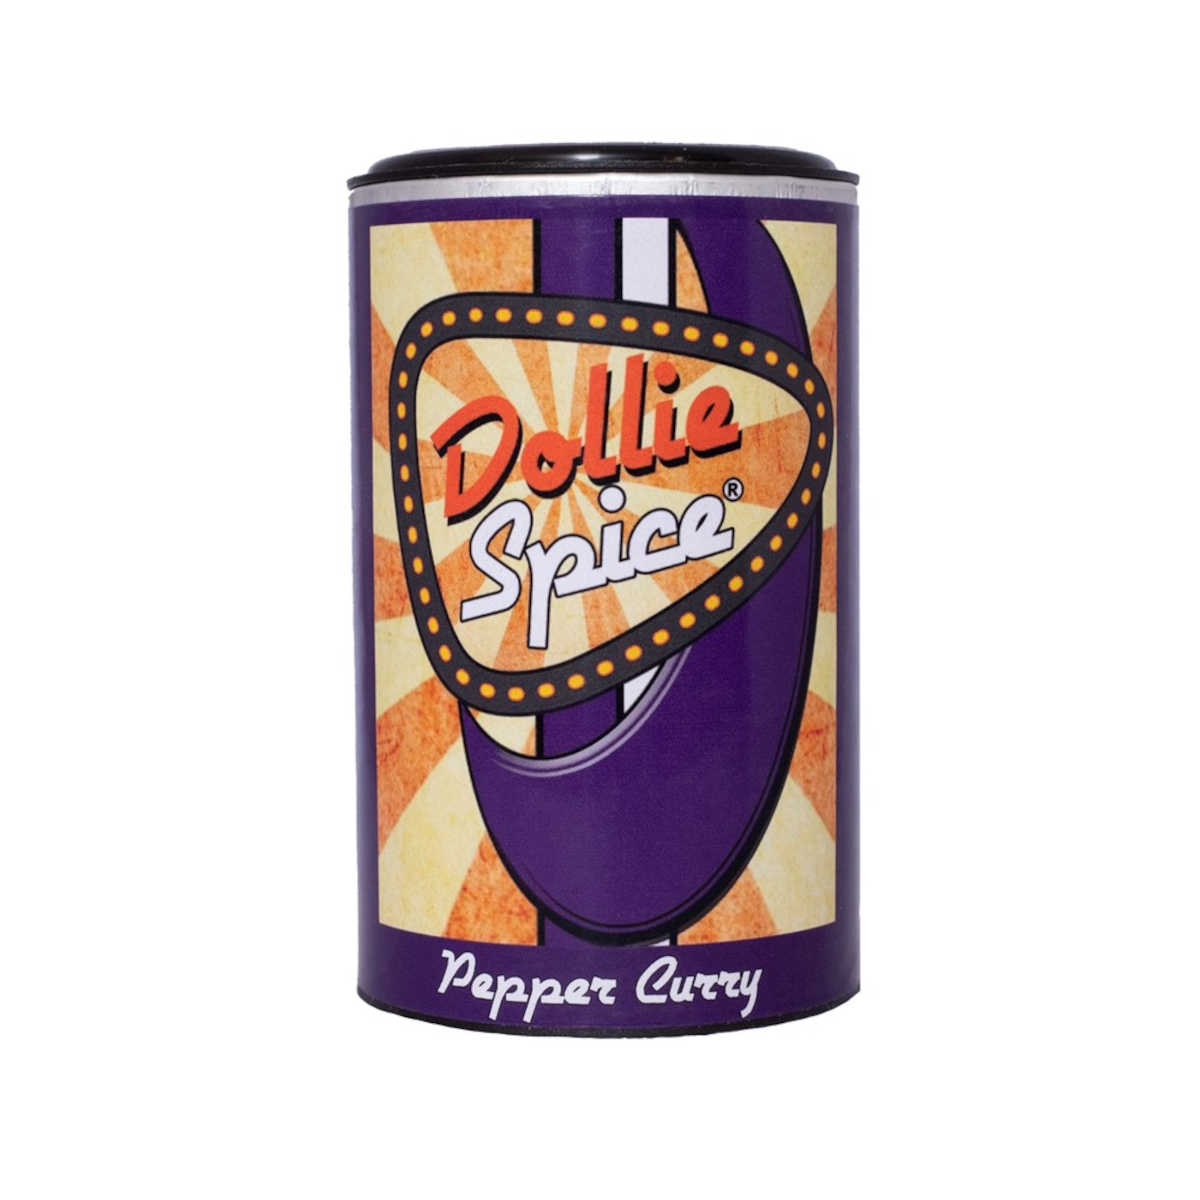 Napoleon Dollie Spice Pepper Curry, 120g